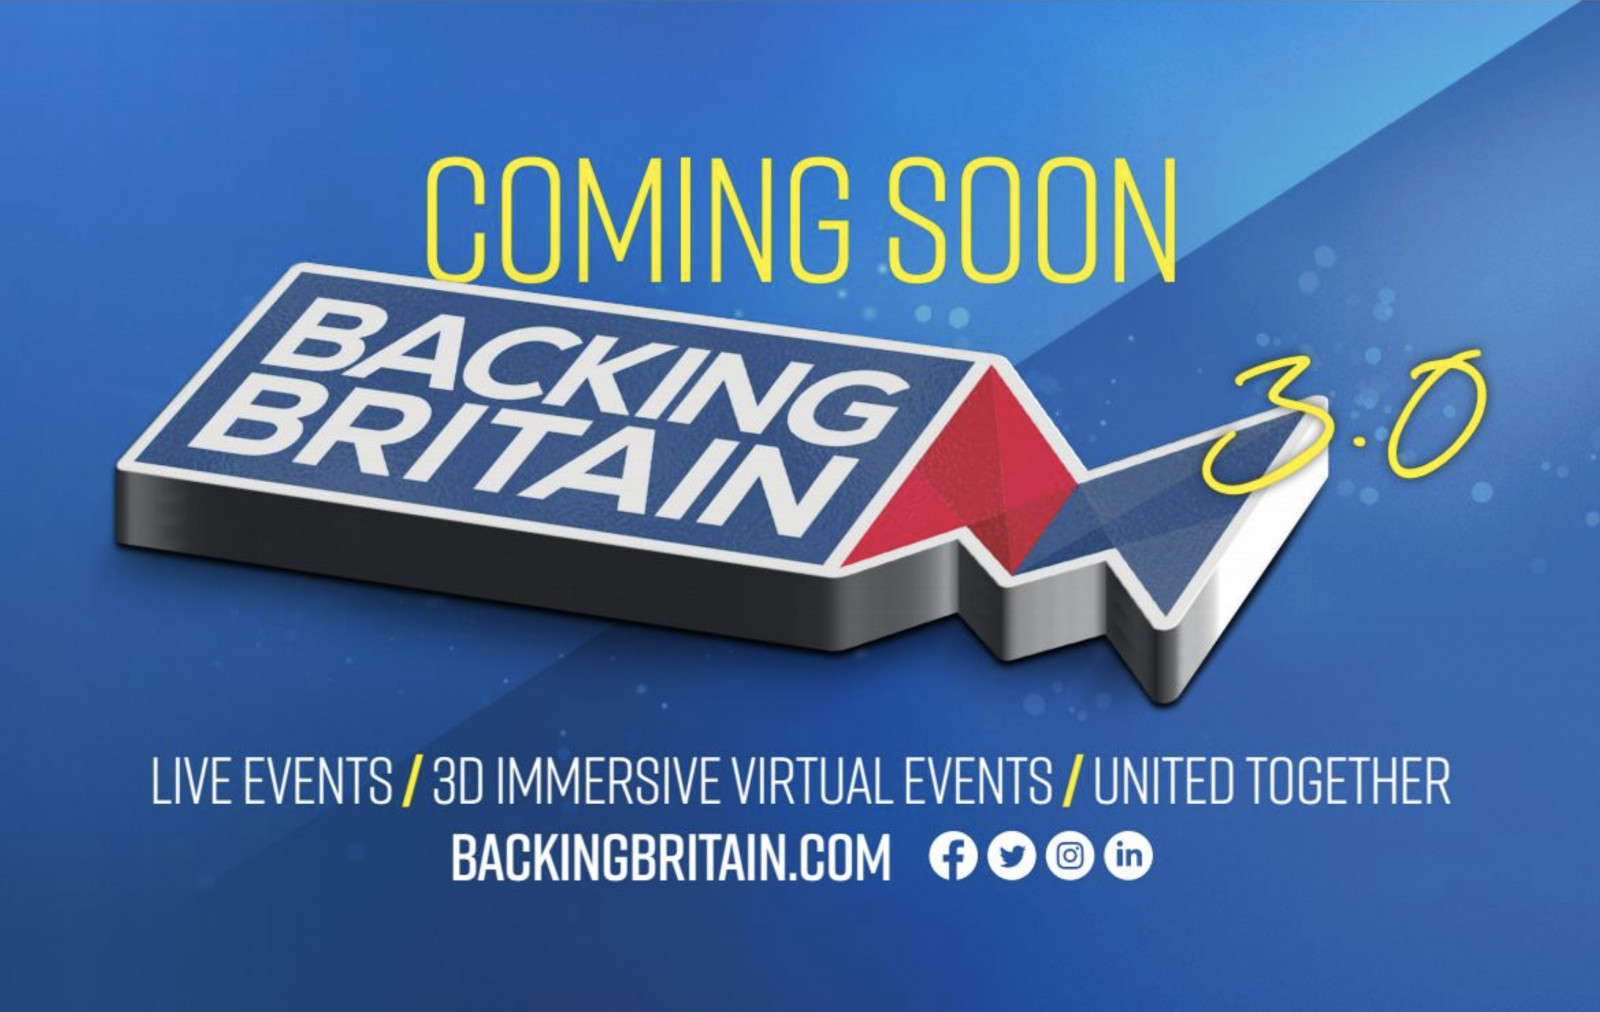 Backing Britain 3.0 - A New Hybrid of Online and I...